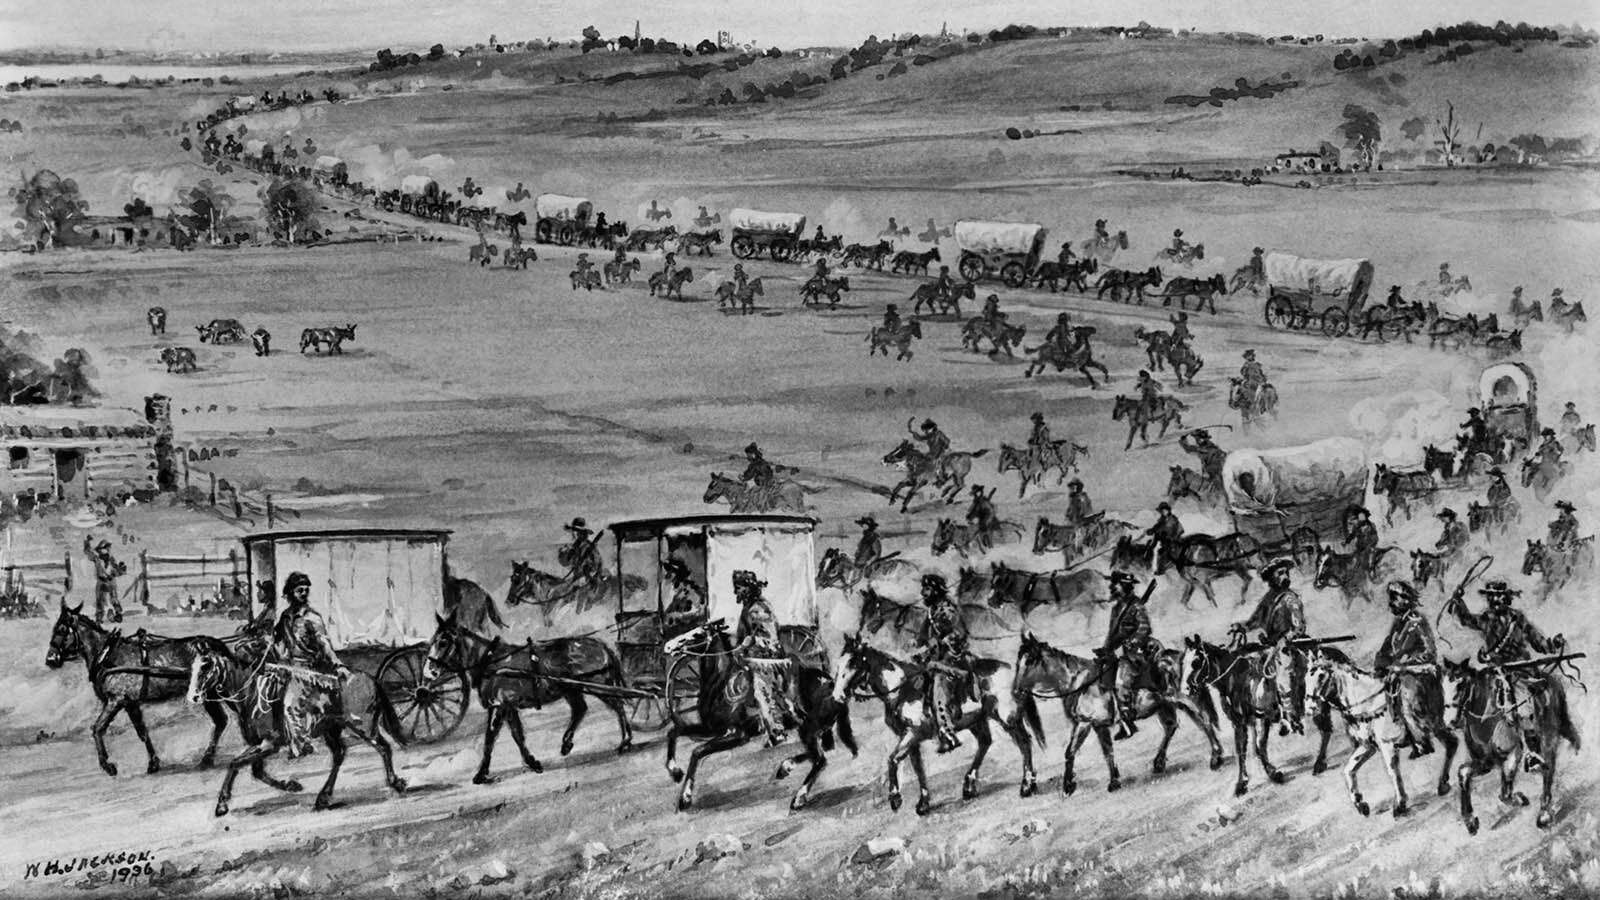 The first covered wagon caravan on the Oregon Trail led by Smith-Jackson-Sublette, consisting of 10 wagons drawn by five mules each, heading for the Wind River valley near the present Lander, Wyoming.